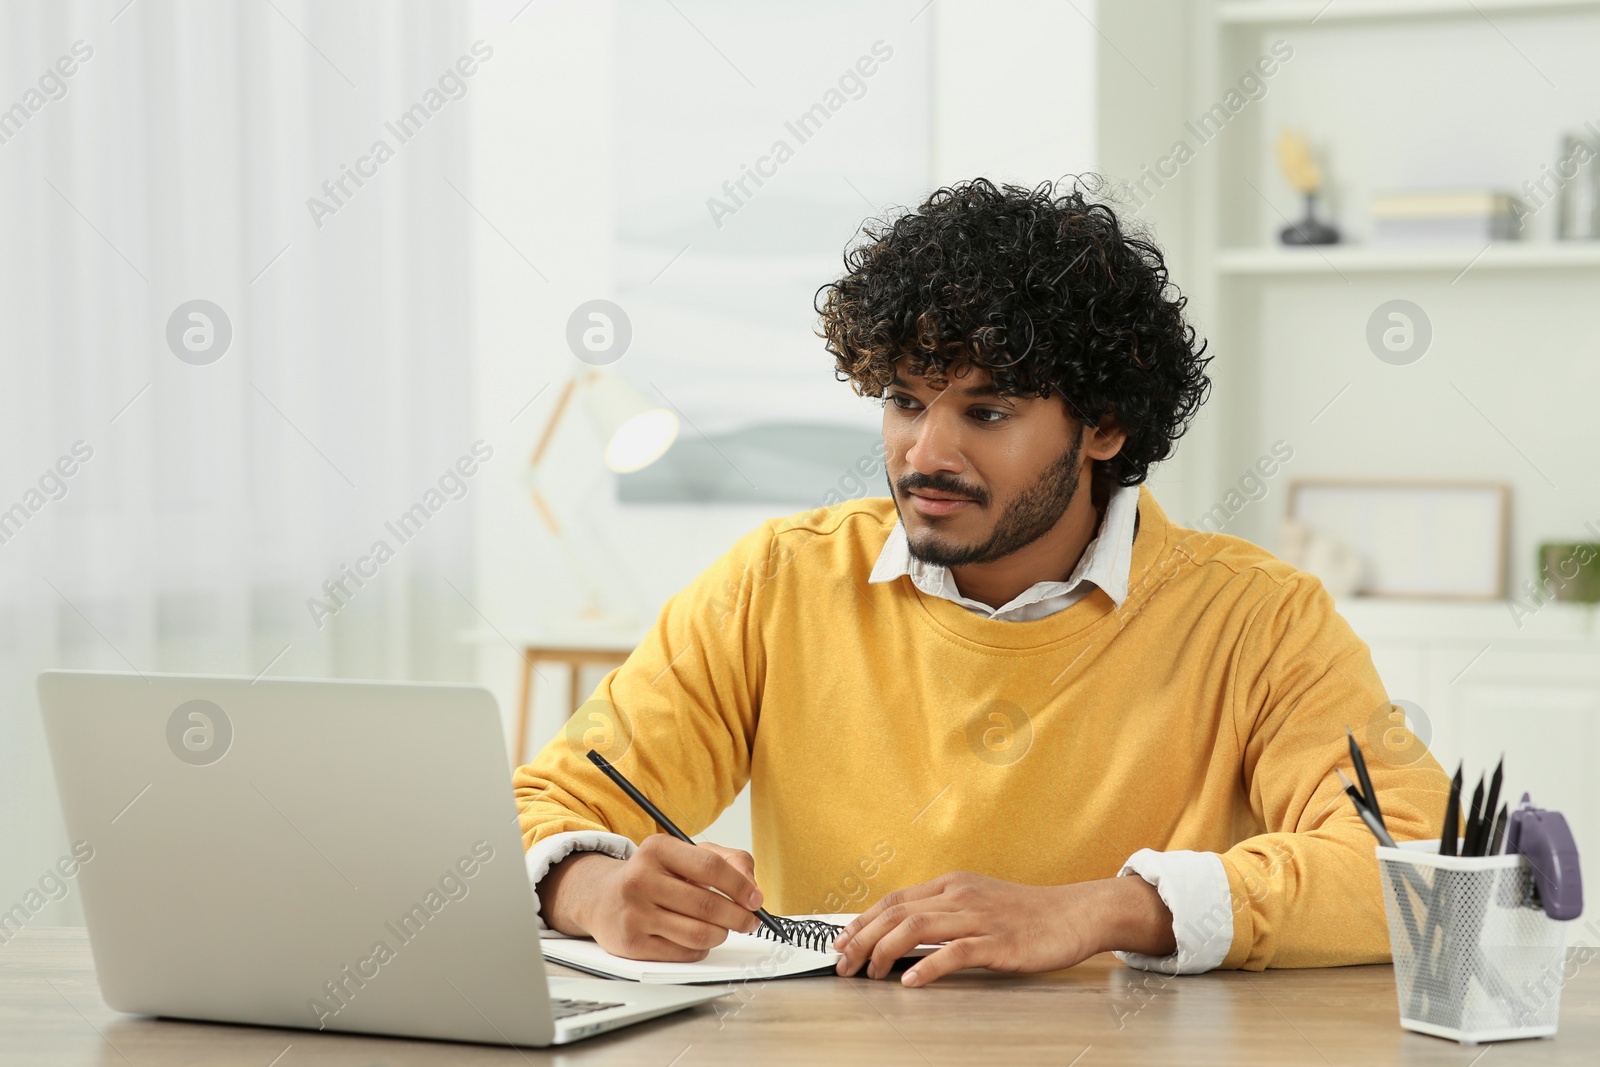 Photo of Handsome man taking notes near laptop in room